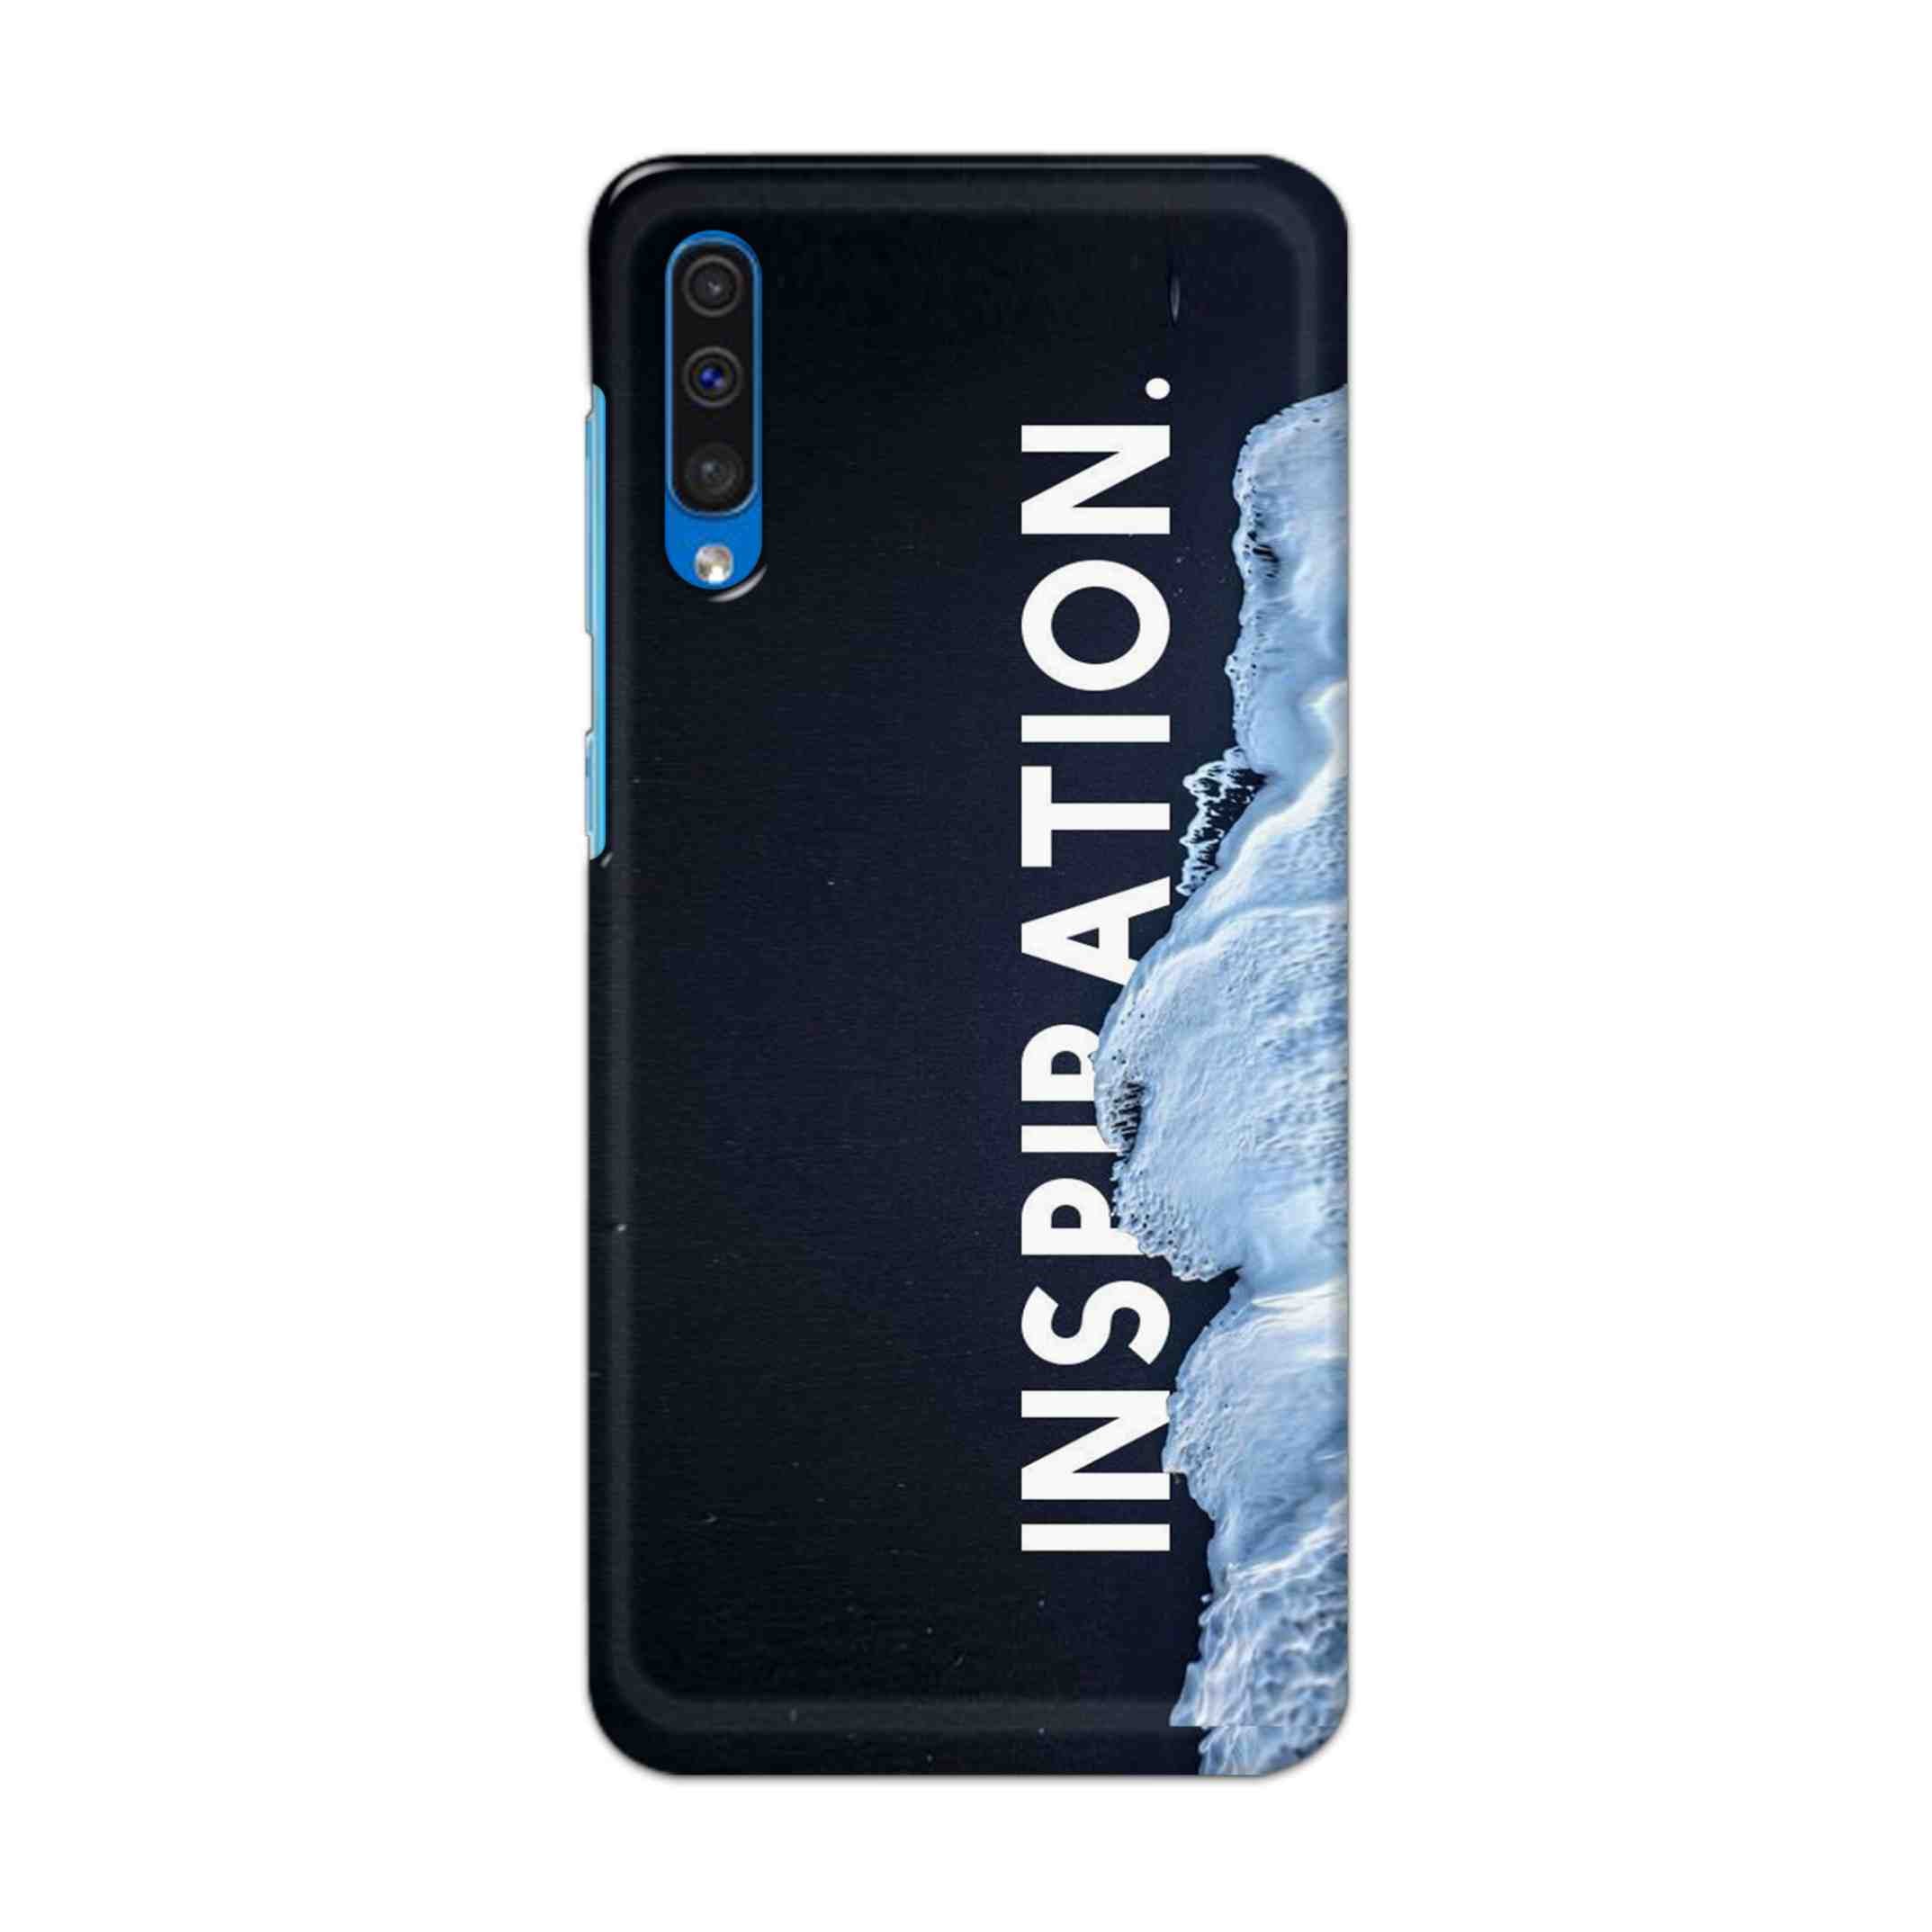 Buy Inspiration Hard Back Mobile Phone Case Cover For Samsung Galaxy A50 / A50s / A30s Online